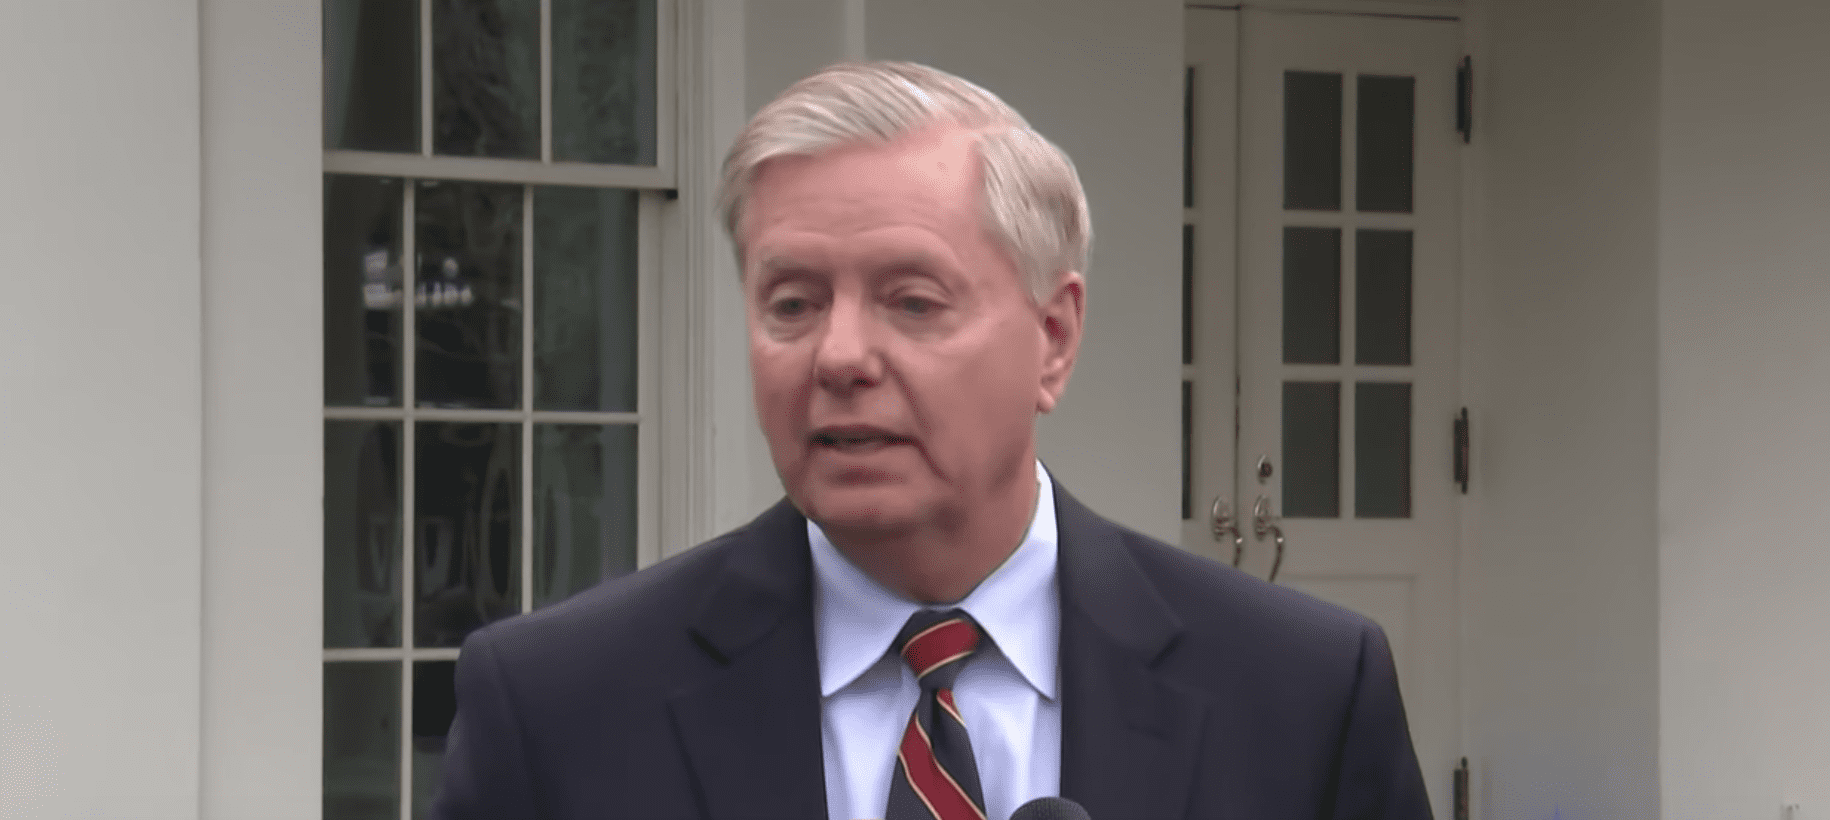 REPORT: Graham jokes about third term for Trump after Democratic debate